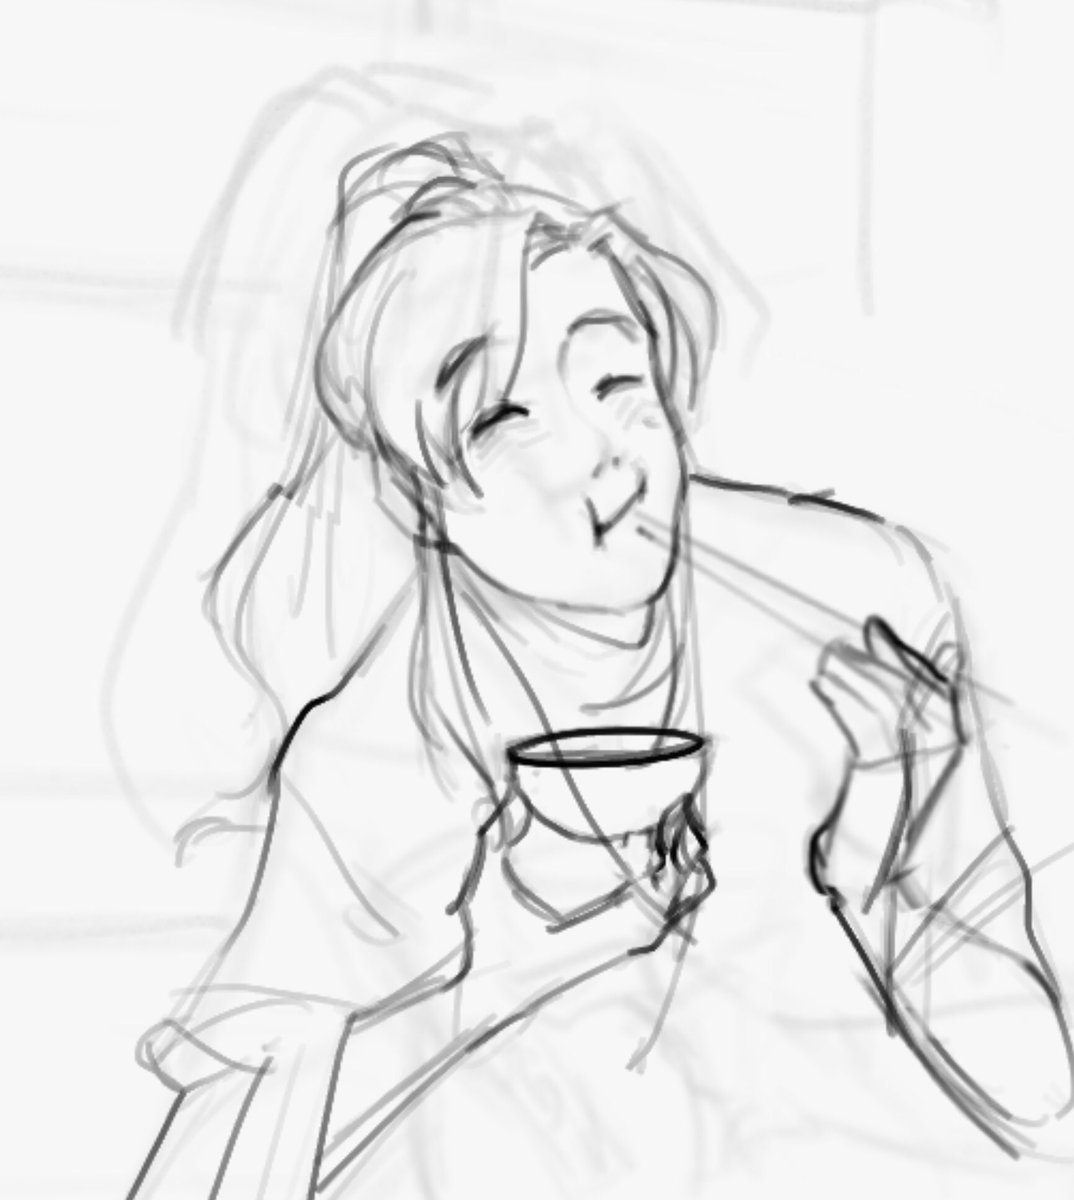 hi sorry but this is my favorite wei ying i've drawn in my life and only bc he's eating so happily ???? 